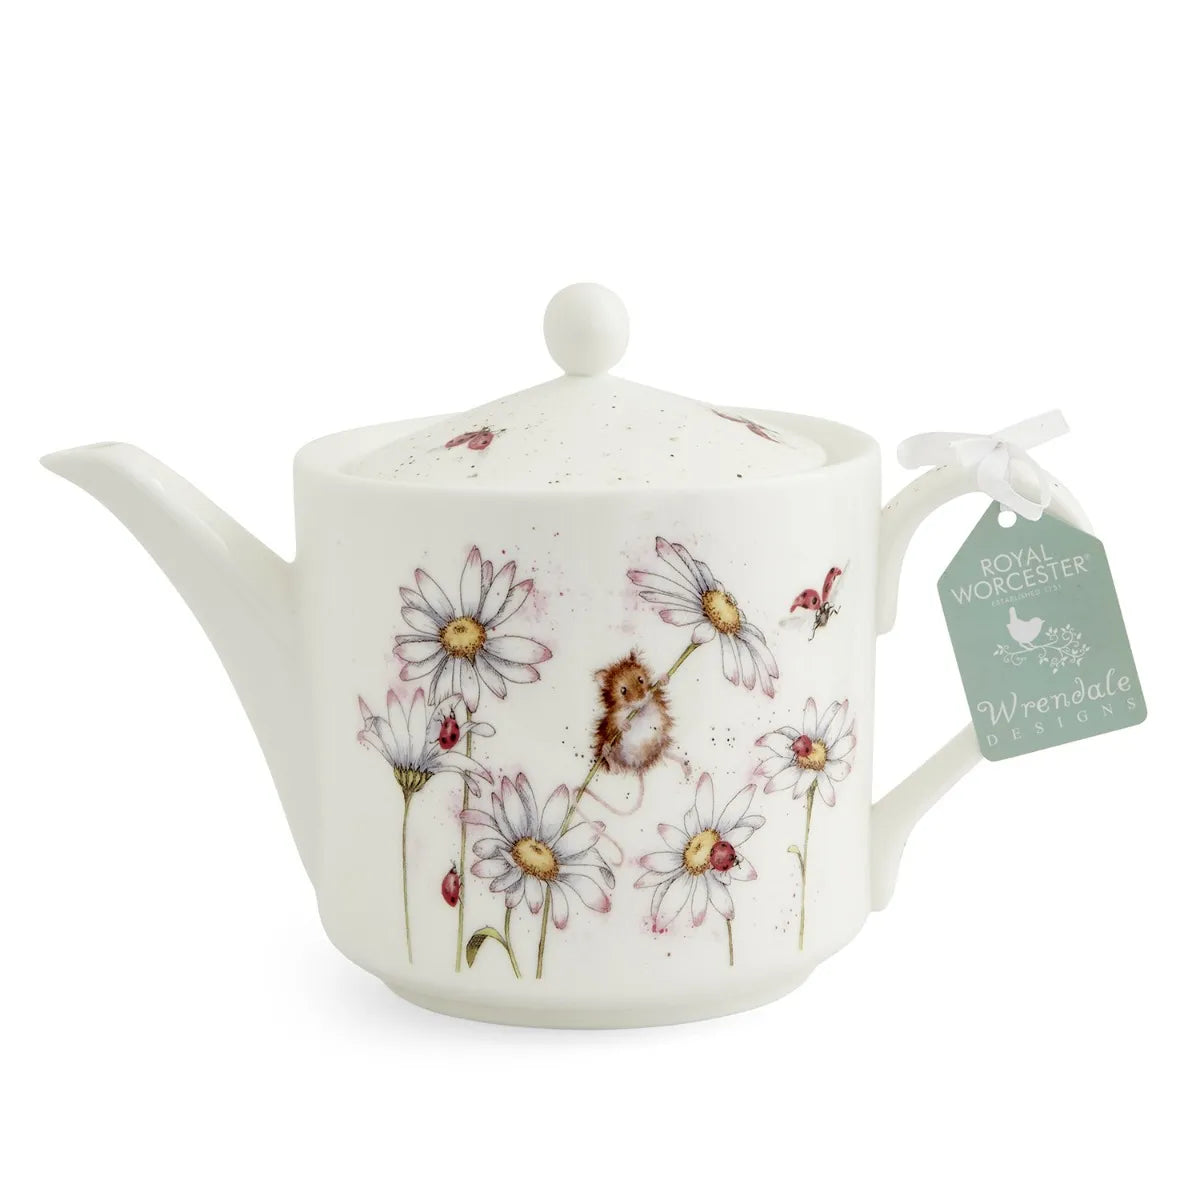 Wrendale Oops a Daisy Mouse 2 Pint Teapot